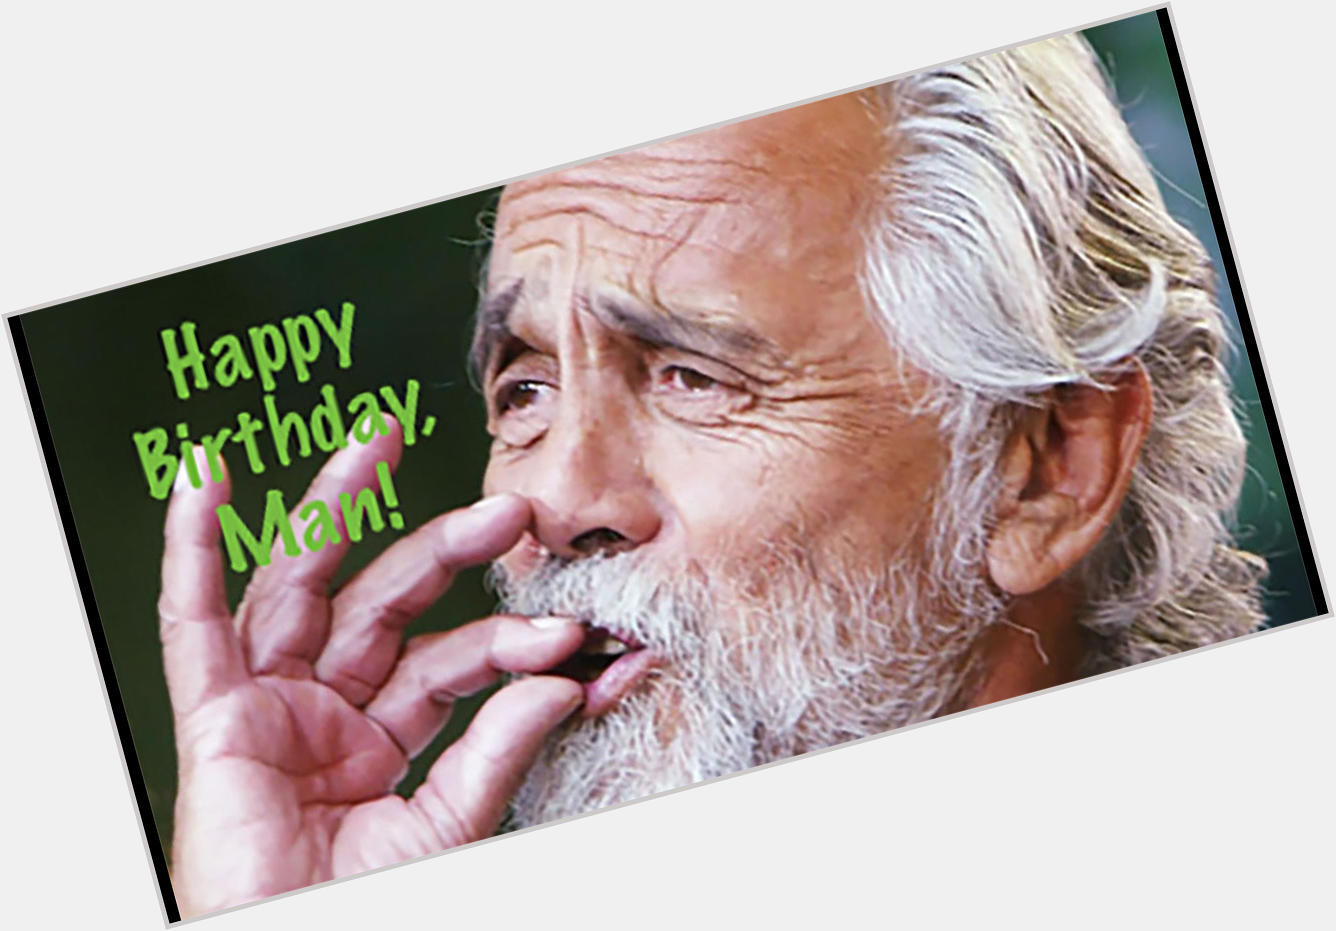 Happy Birthday Tommy Chong!
Date of birth
May 24, 1938
age 84 years 